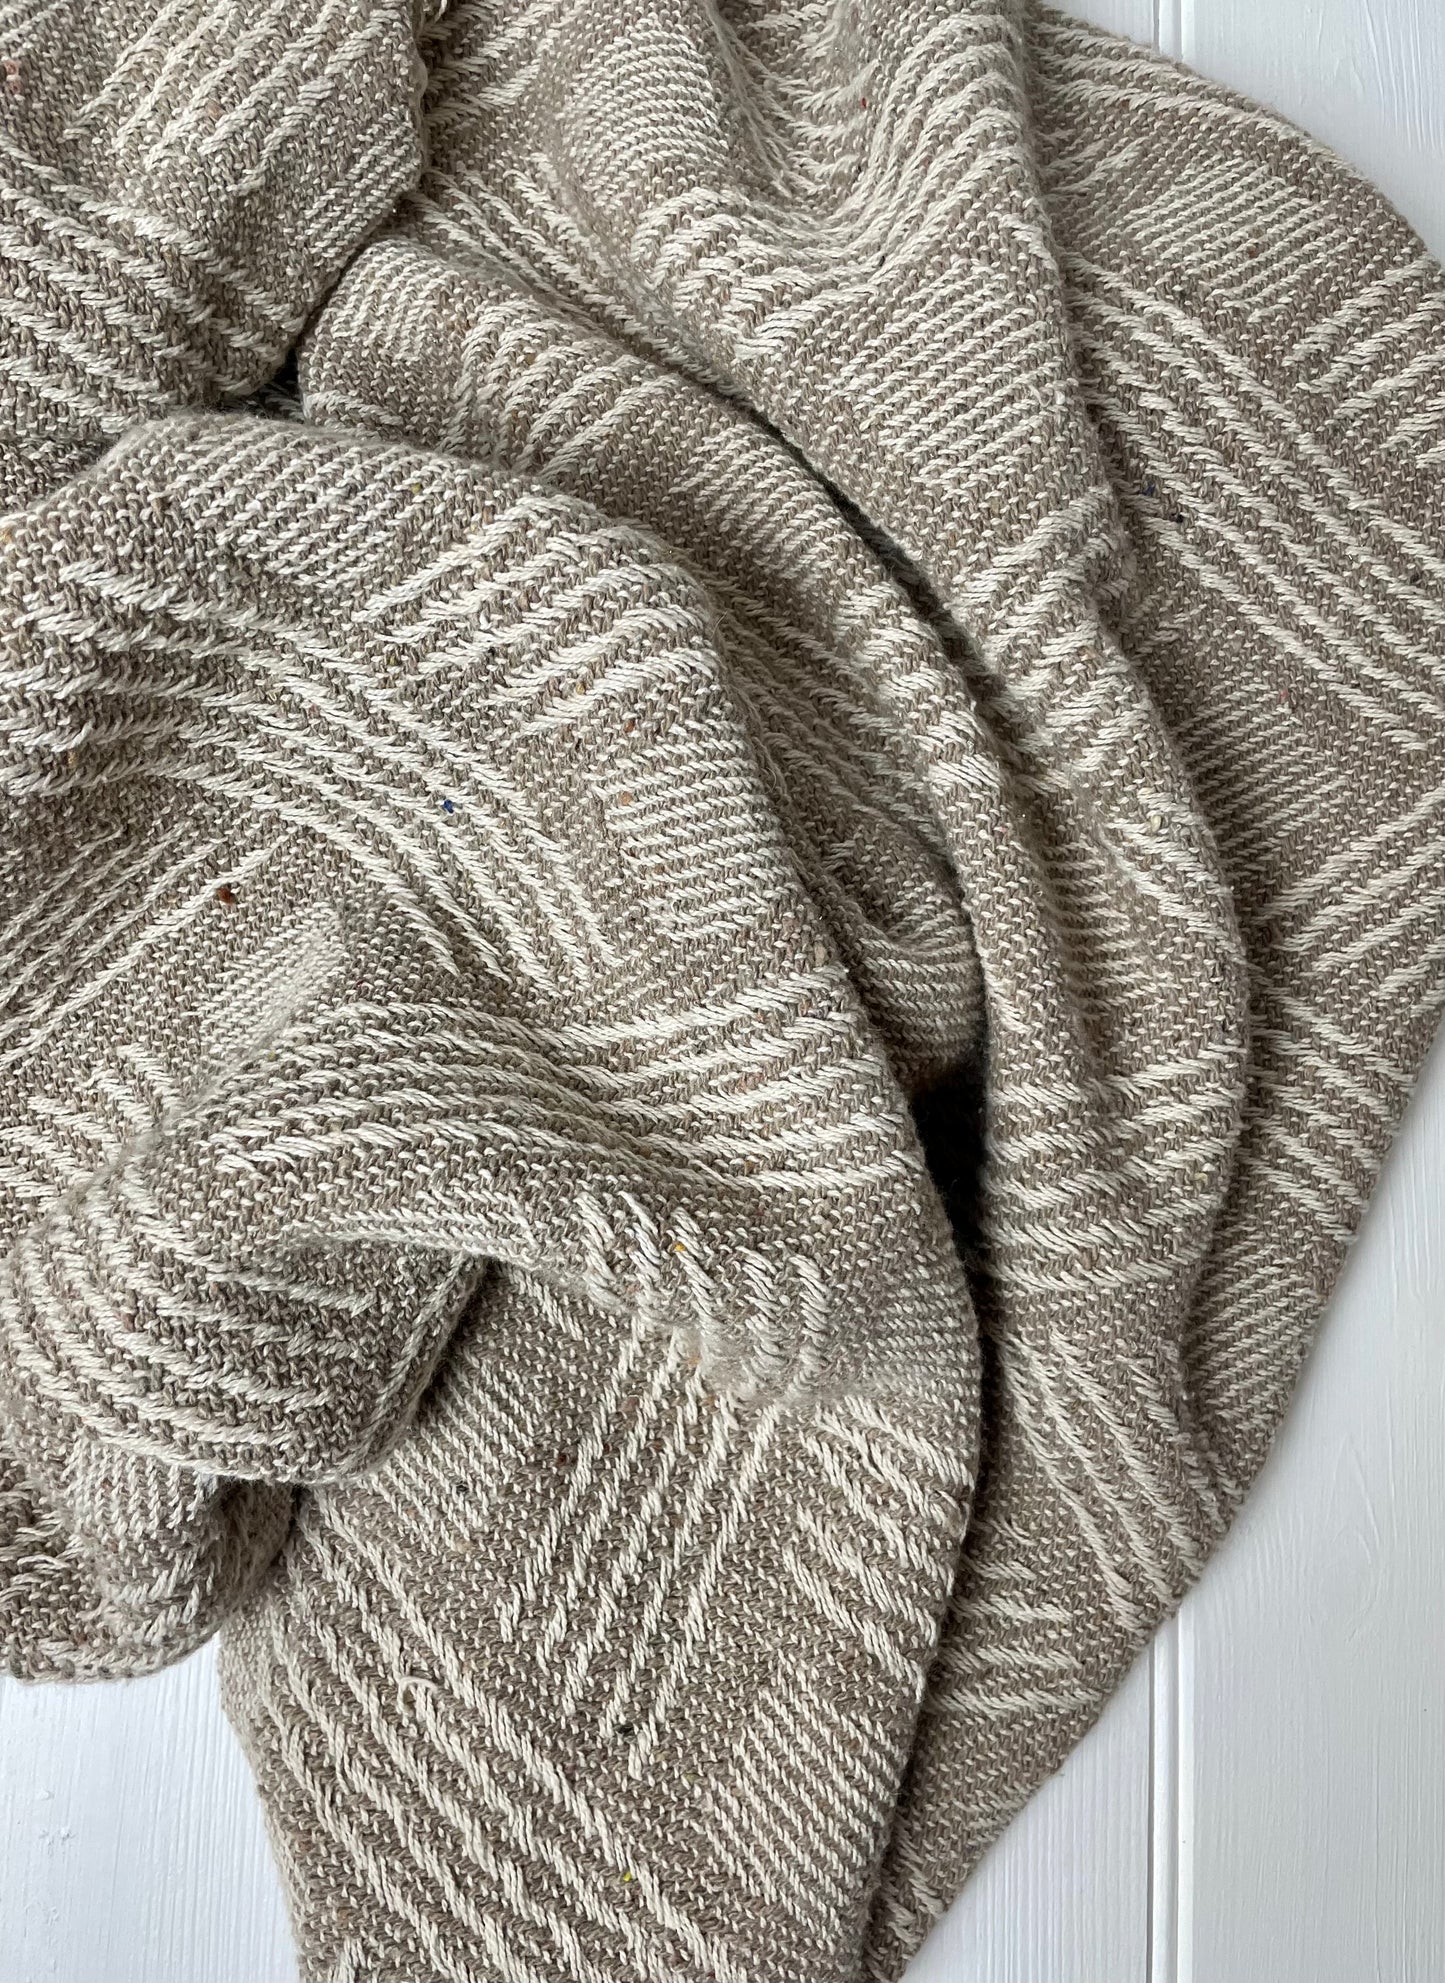 Patterned Throw